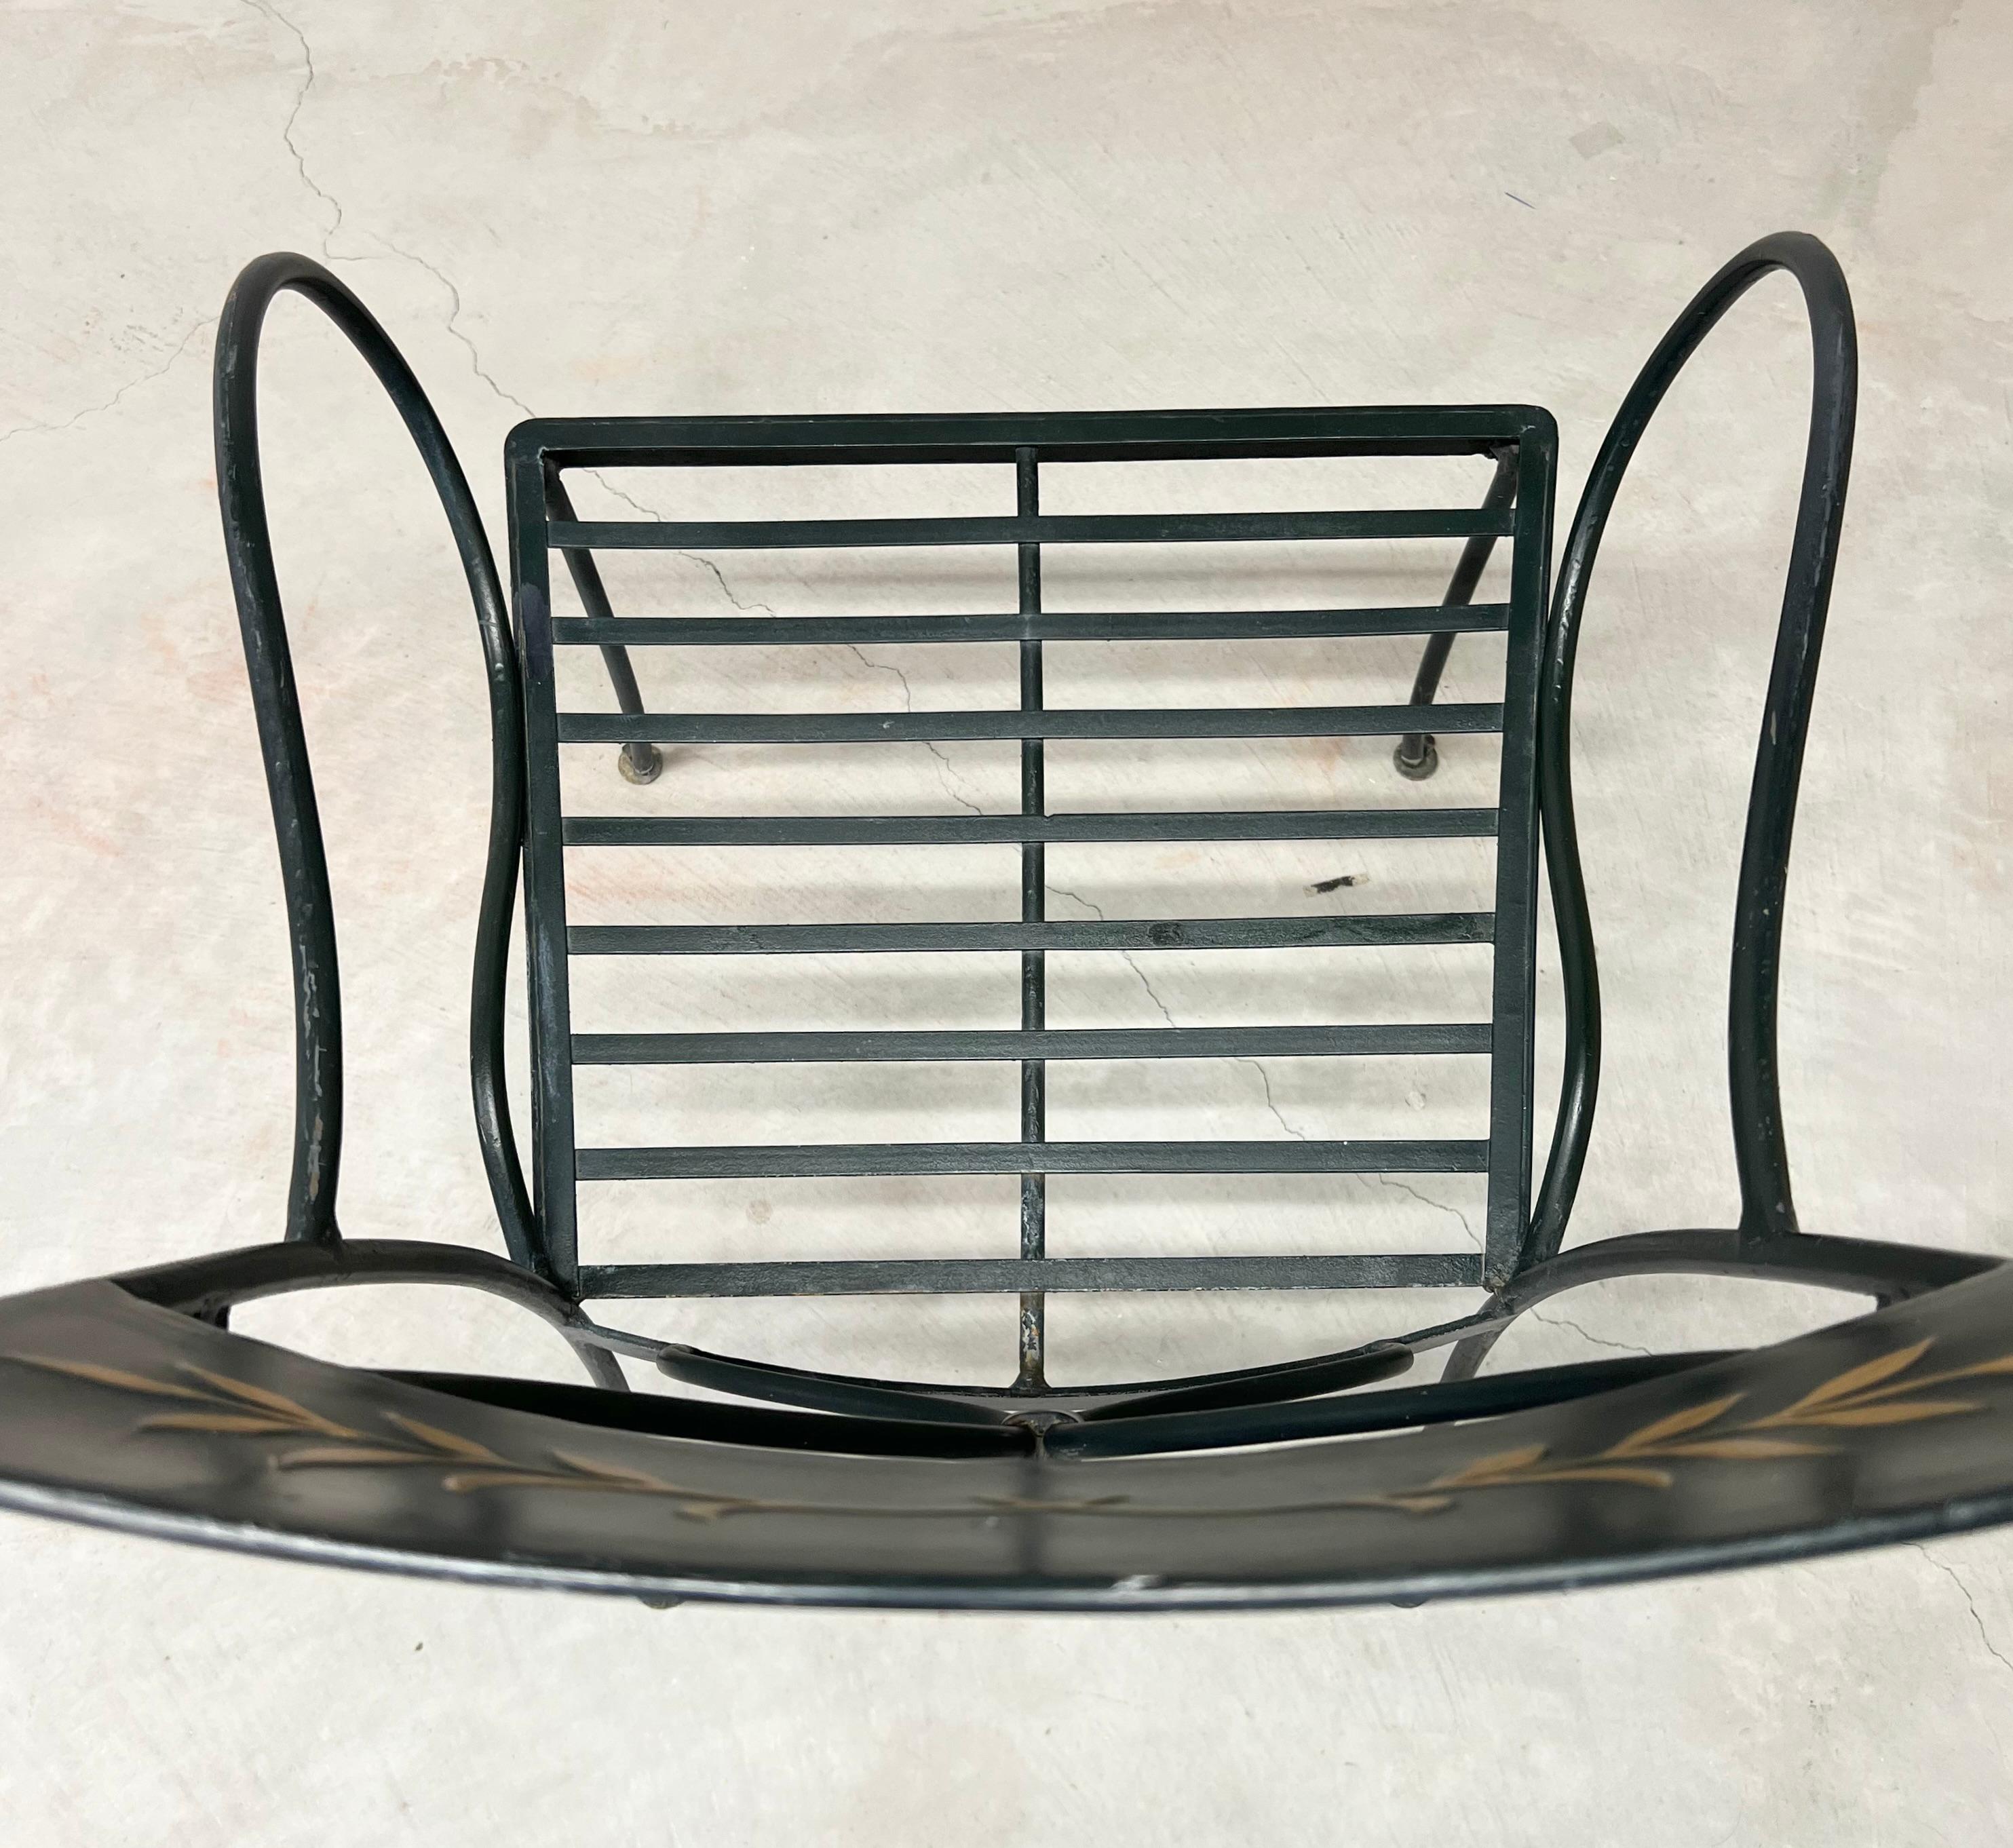 1950s Wrought iron sculptural chair set with original gold painted leaf detailing.  These chairs work for indoor or outdoor spaces adding a touch of regency.  They are also a modern take on the famed French Arras-style garden seating of the early